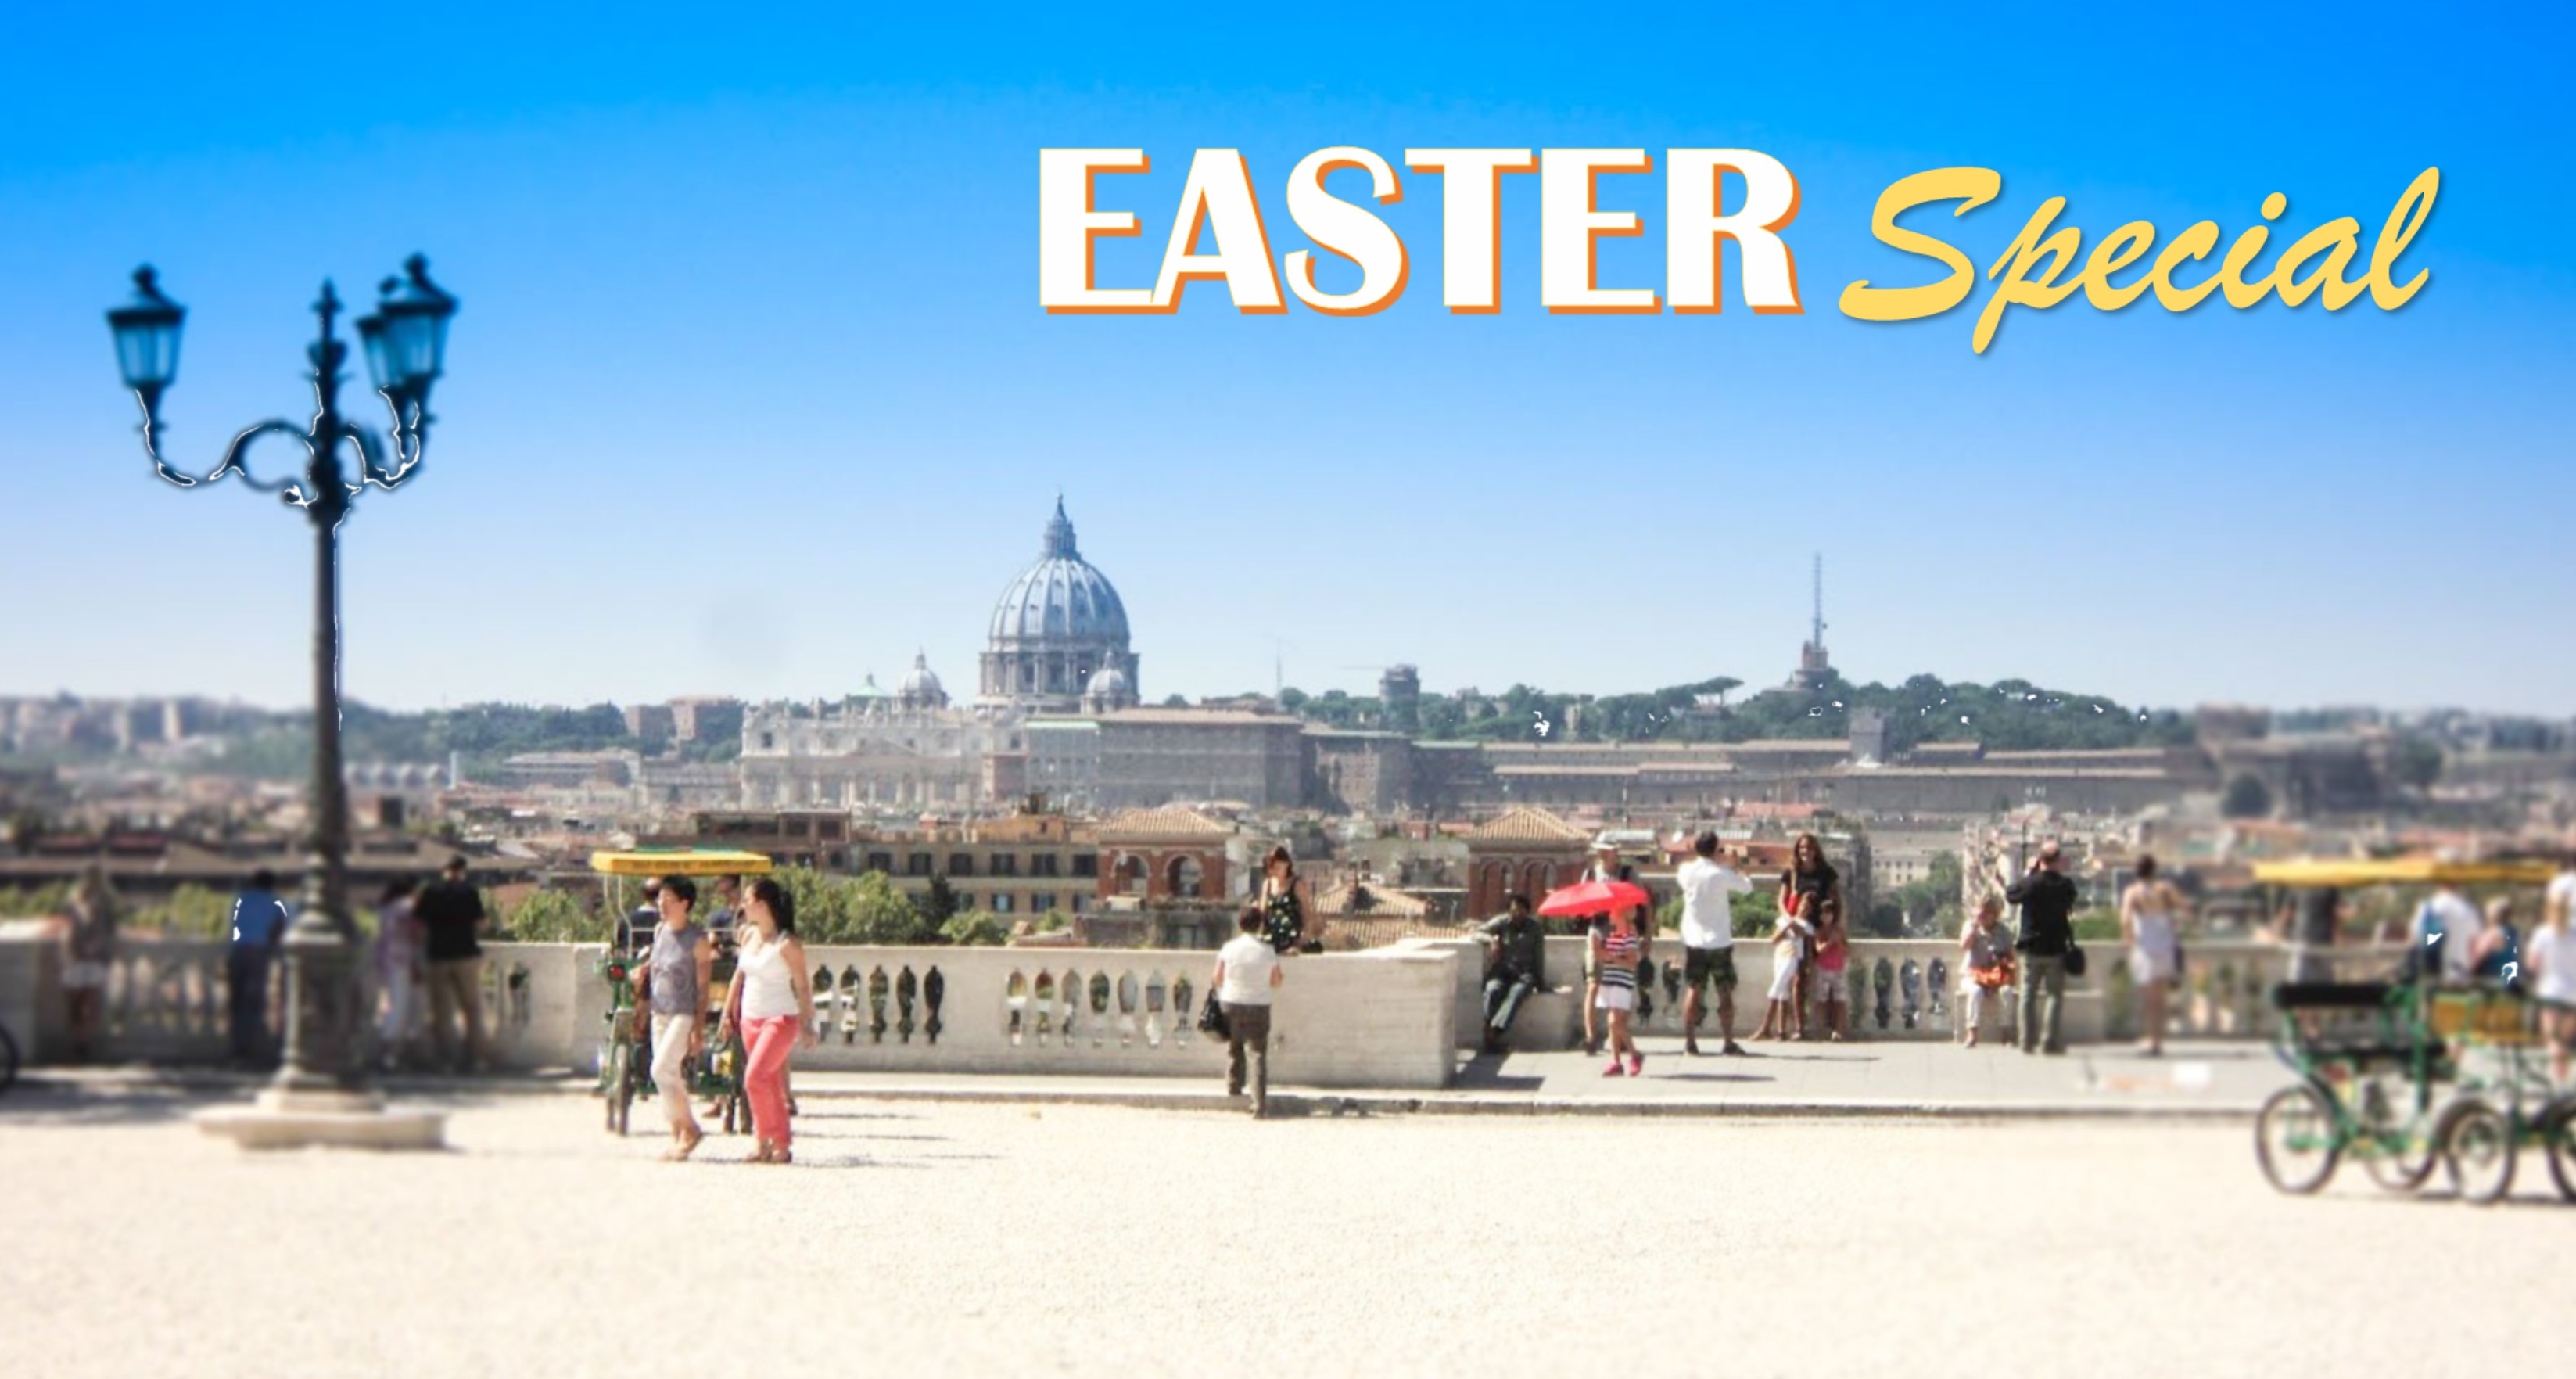 Special Offer Easter 2016 in Rome